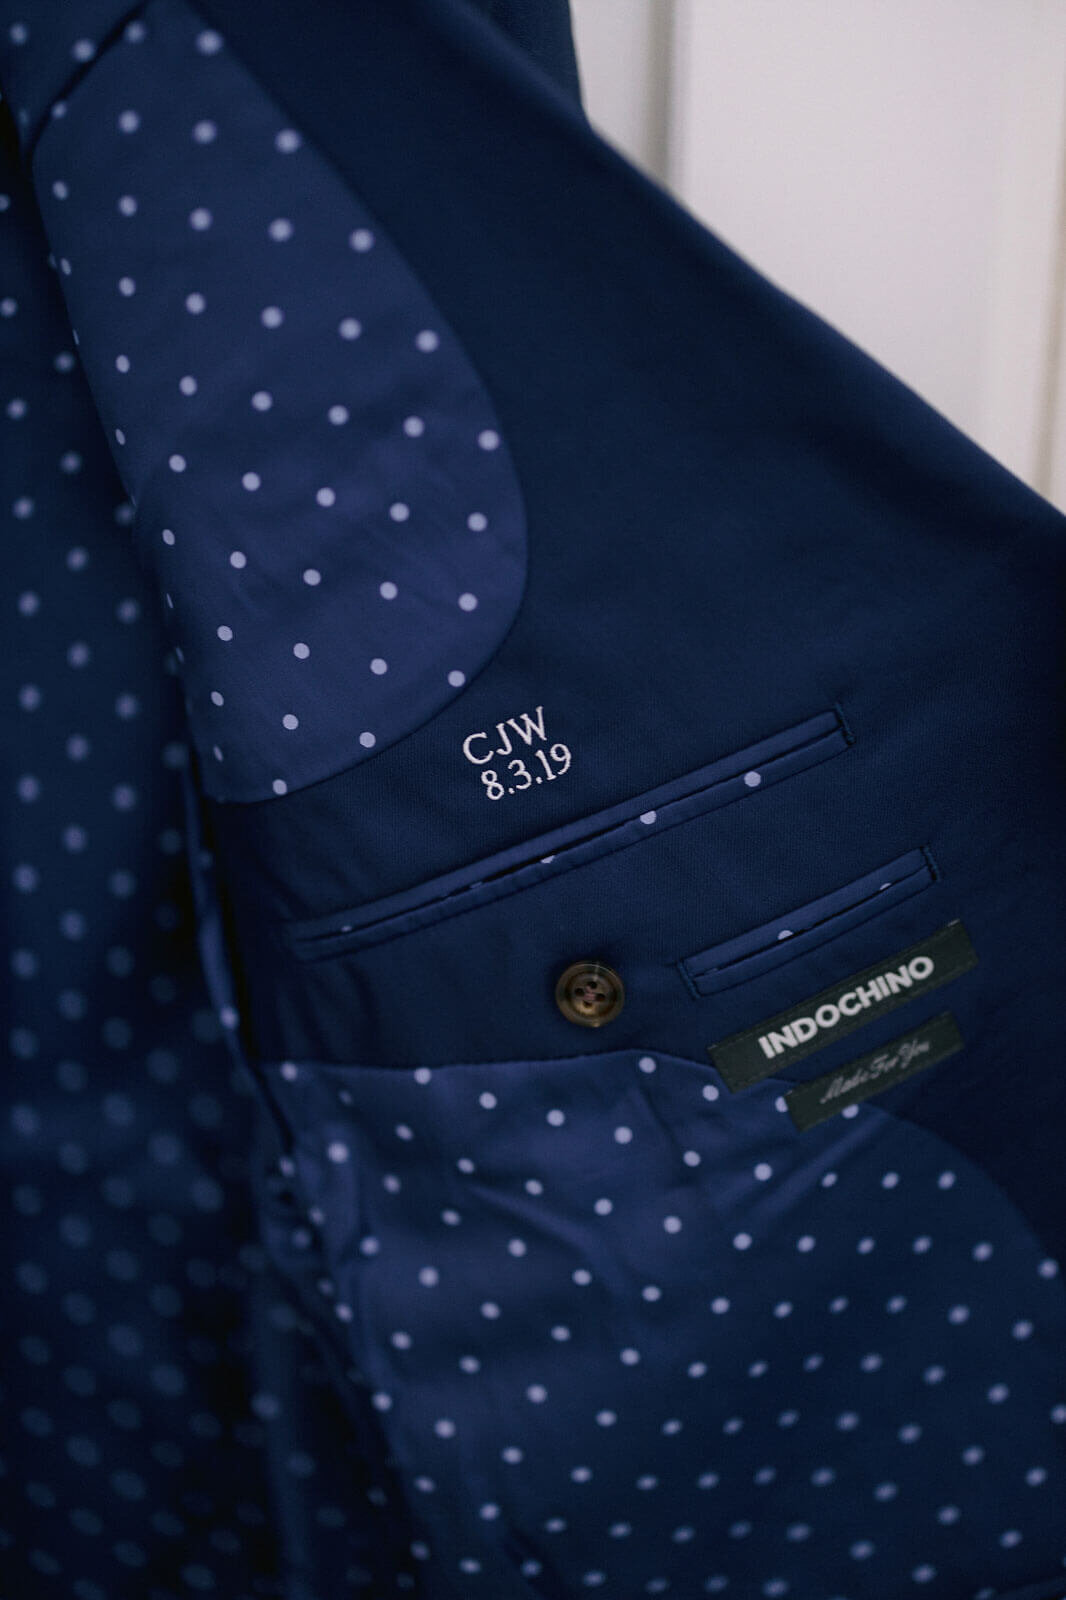 A close-up shot of the groom's suit, showing the brand name, Indochino, at Cape Cod, MA.